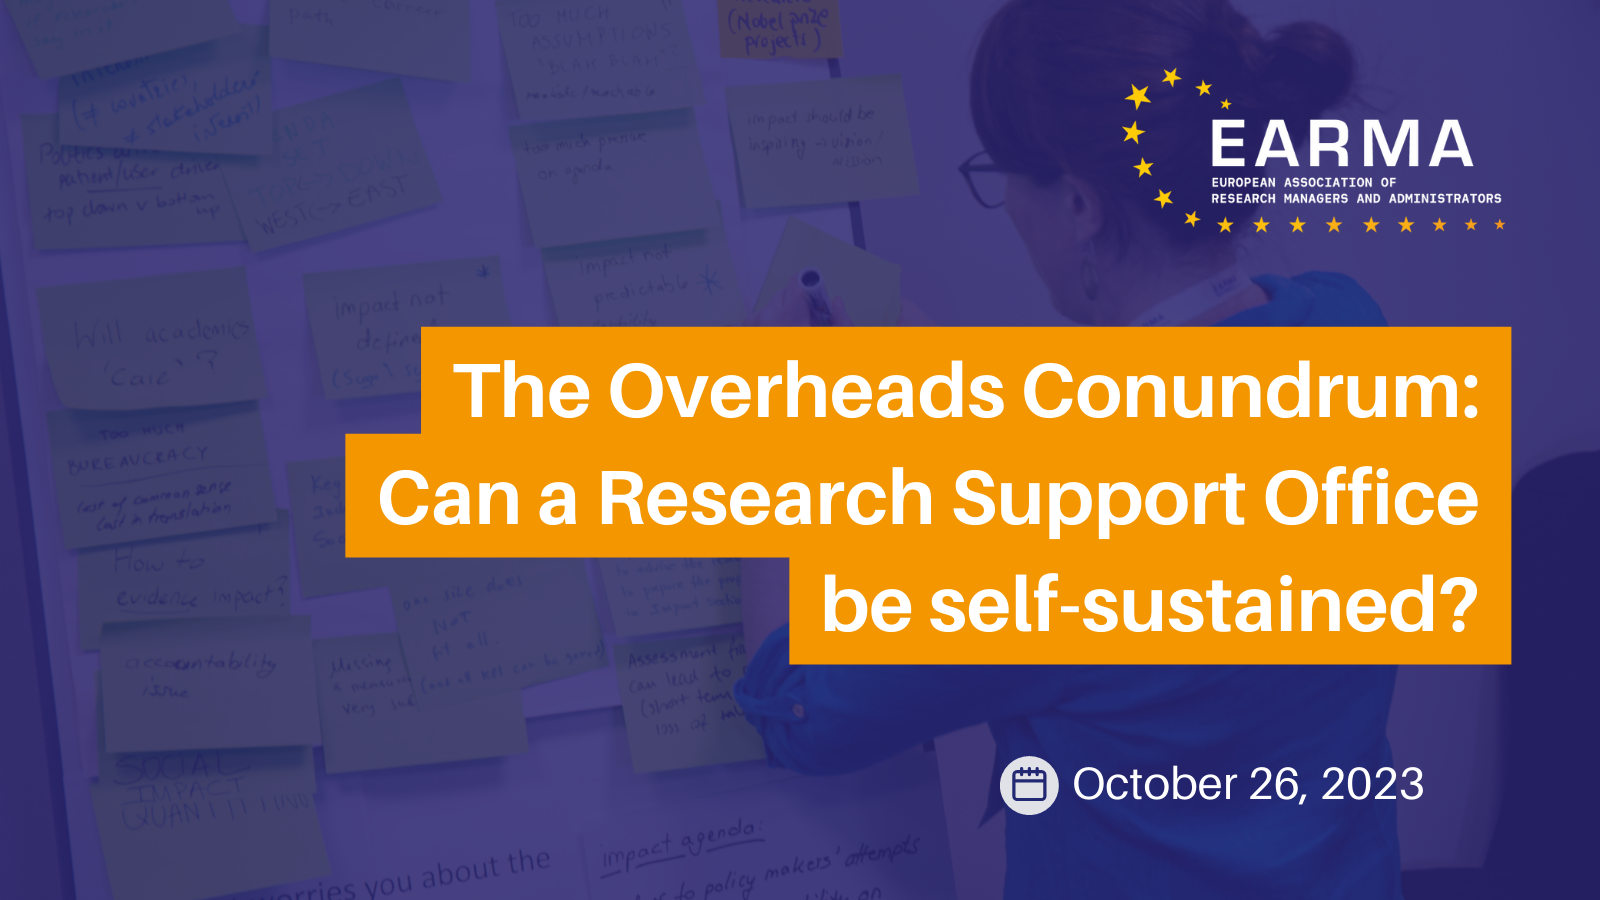 The Overheads Conundrum: Can a Research Support Office be Self-sustained?